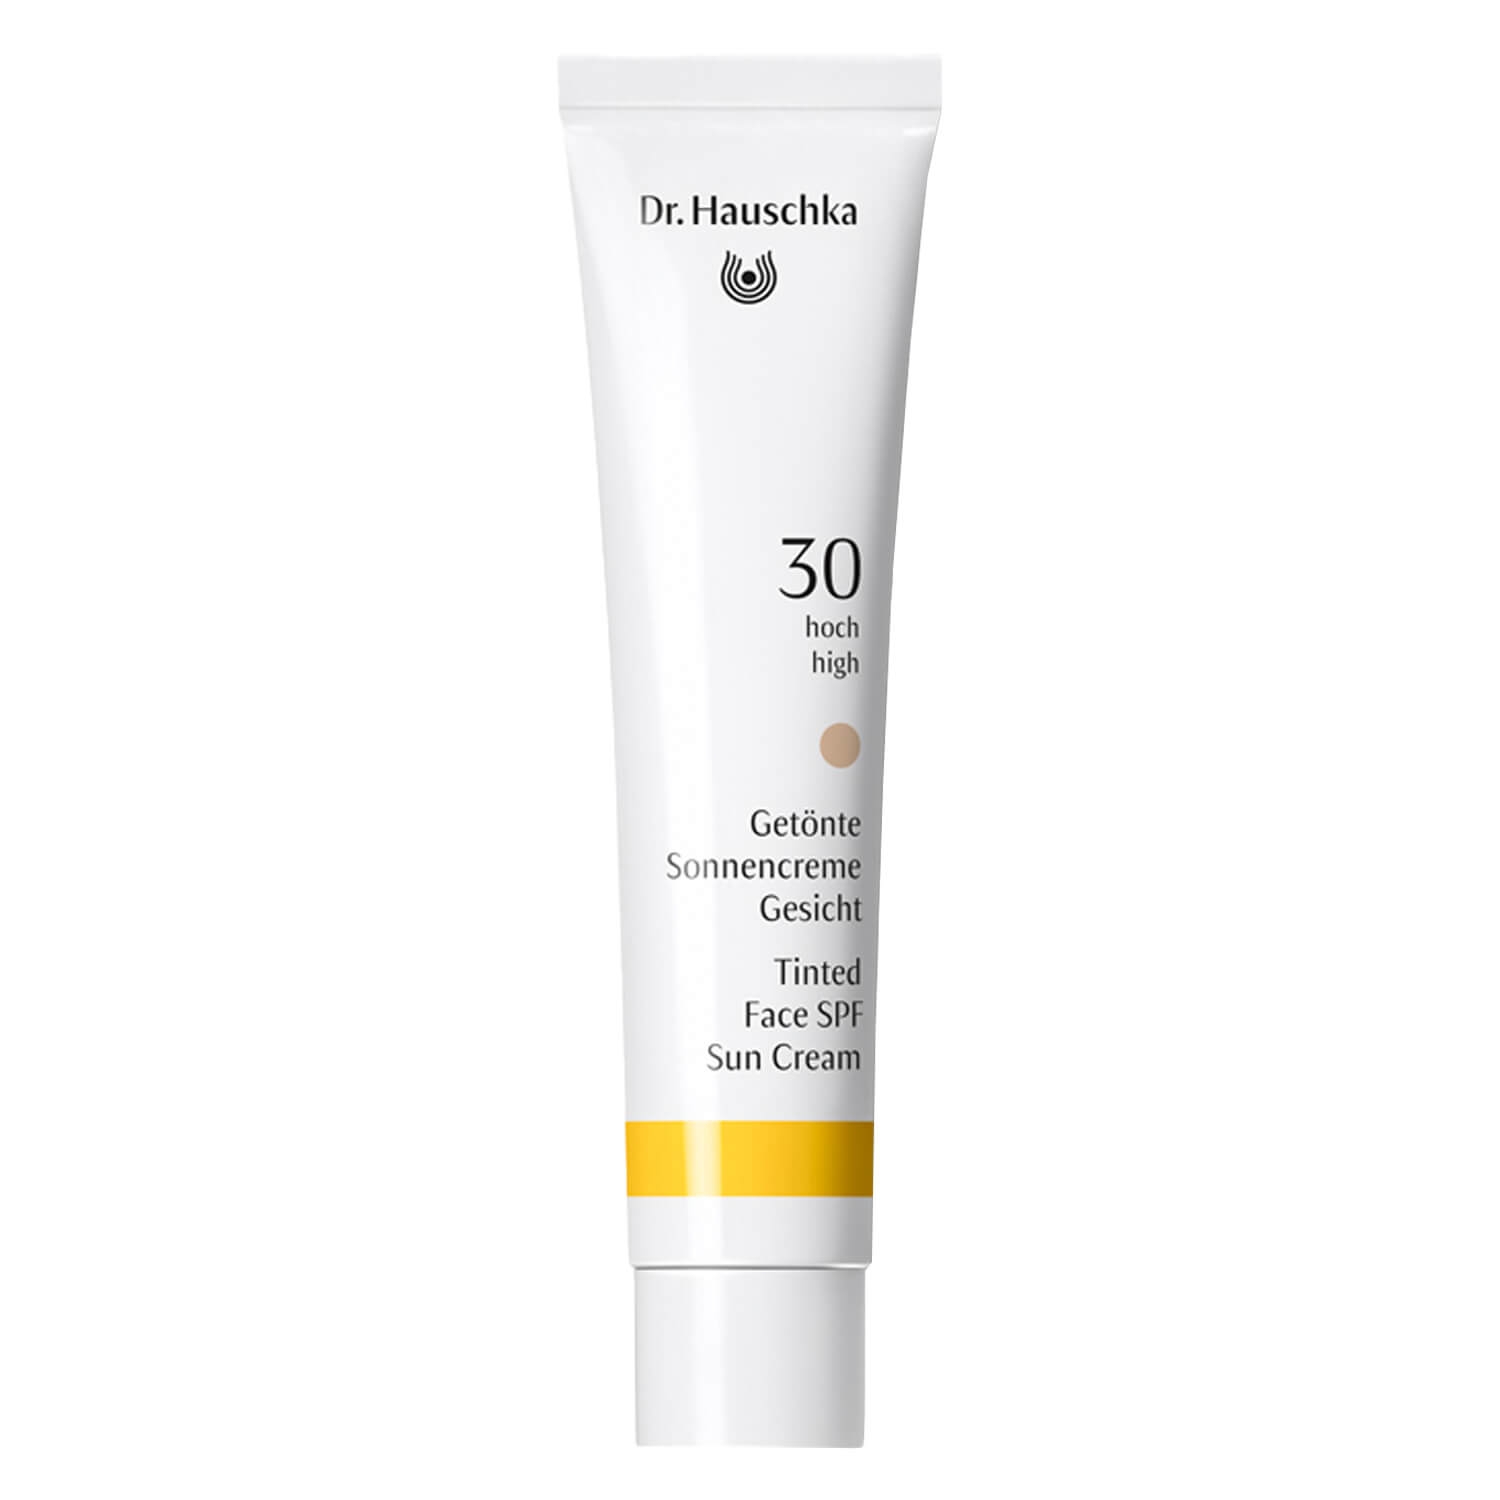 Product image from Dr. Hauschka - Getönte Sonnencreme Gesicht SPF30